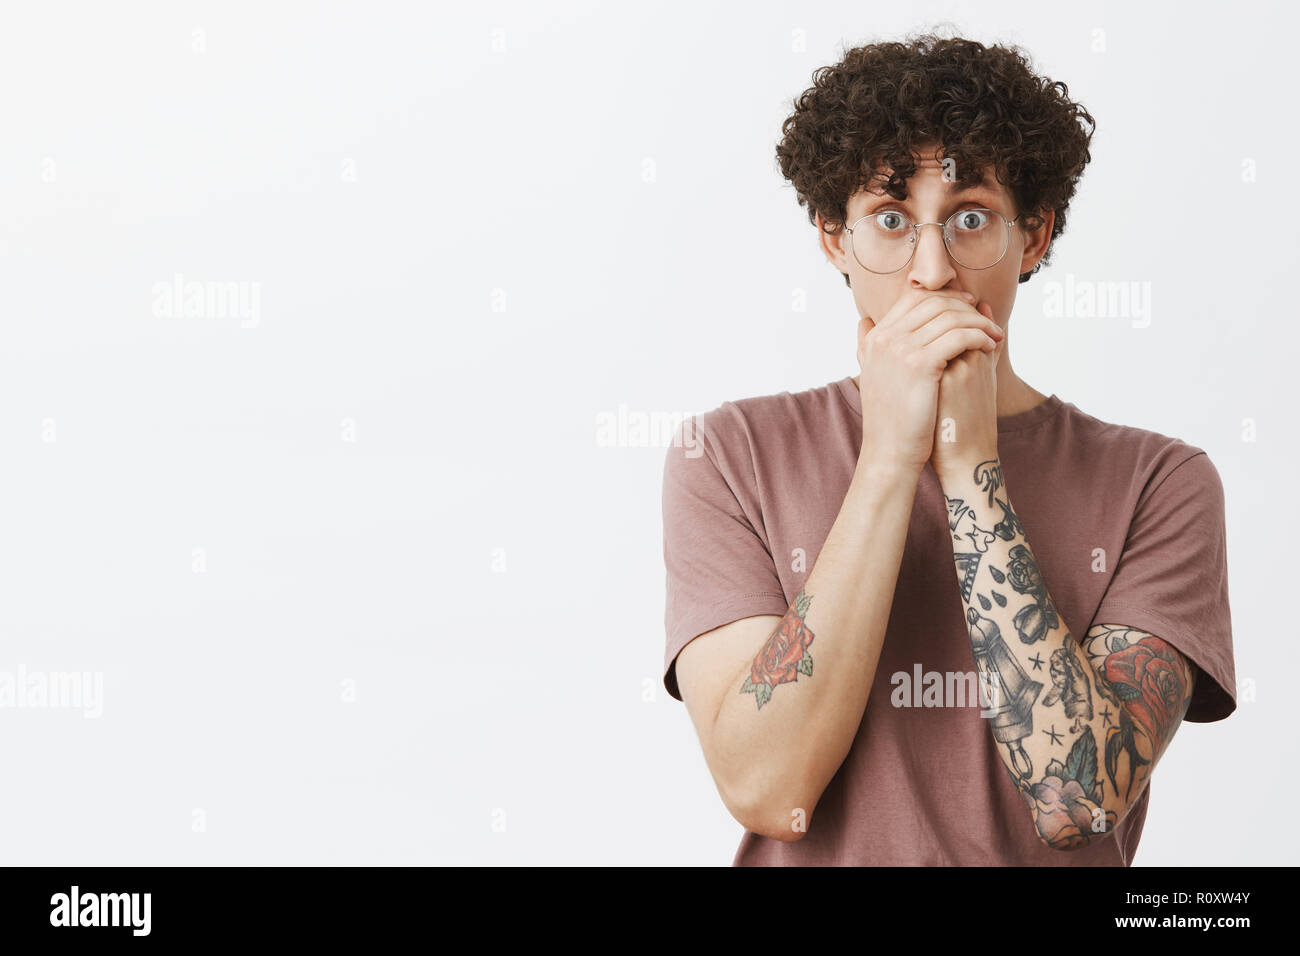 Man seeing friend making cool trick on skate gasping staring amazed and surprised covering mouth with hands popping eyes at camera standing impressed and shocked over gray background Stock Photo